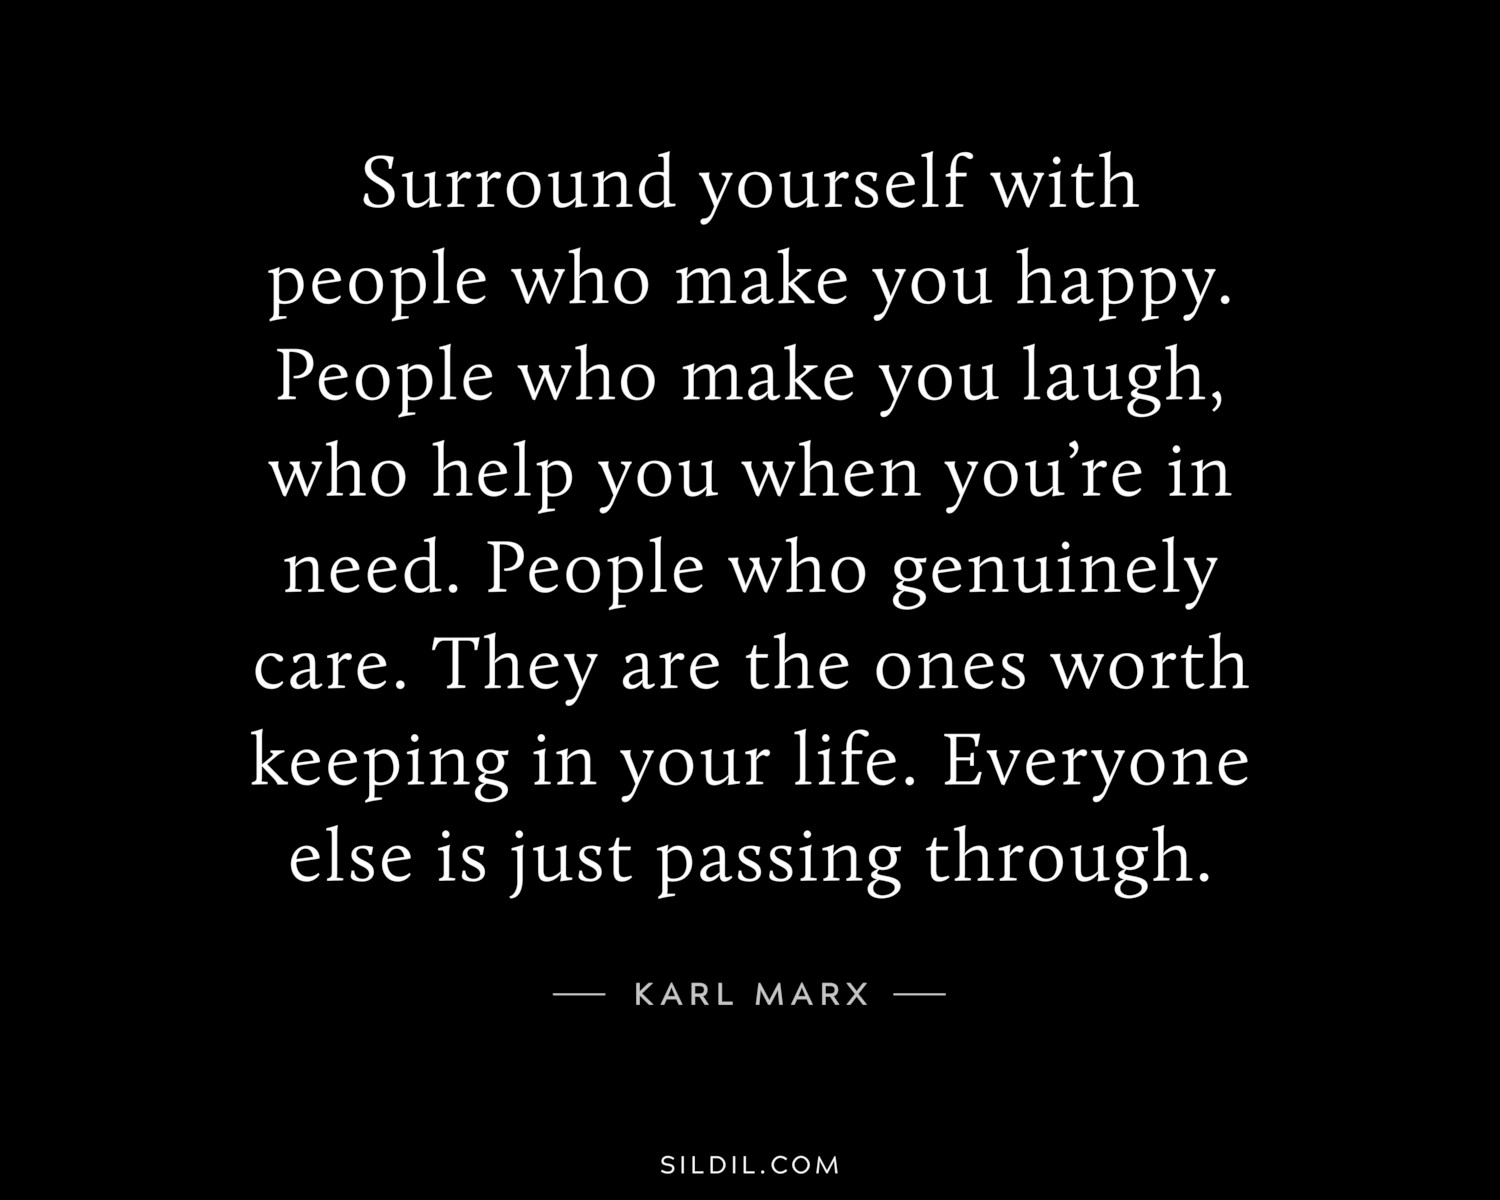 Surround yourself with people who make you happy. People who make you laugh, who help you when you’re in need. People who genuinely care. They are the ones worth keeping in your life. Everyone else is just passing through.